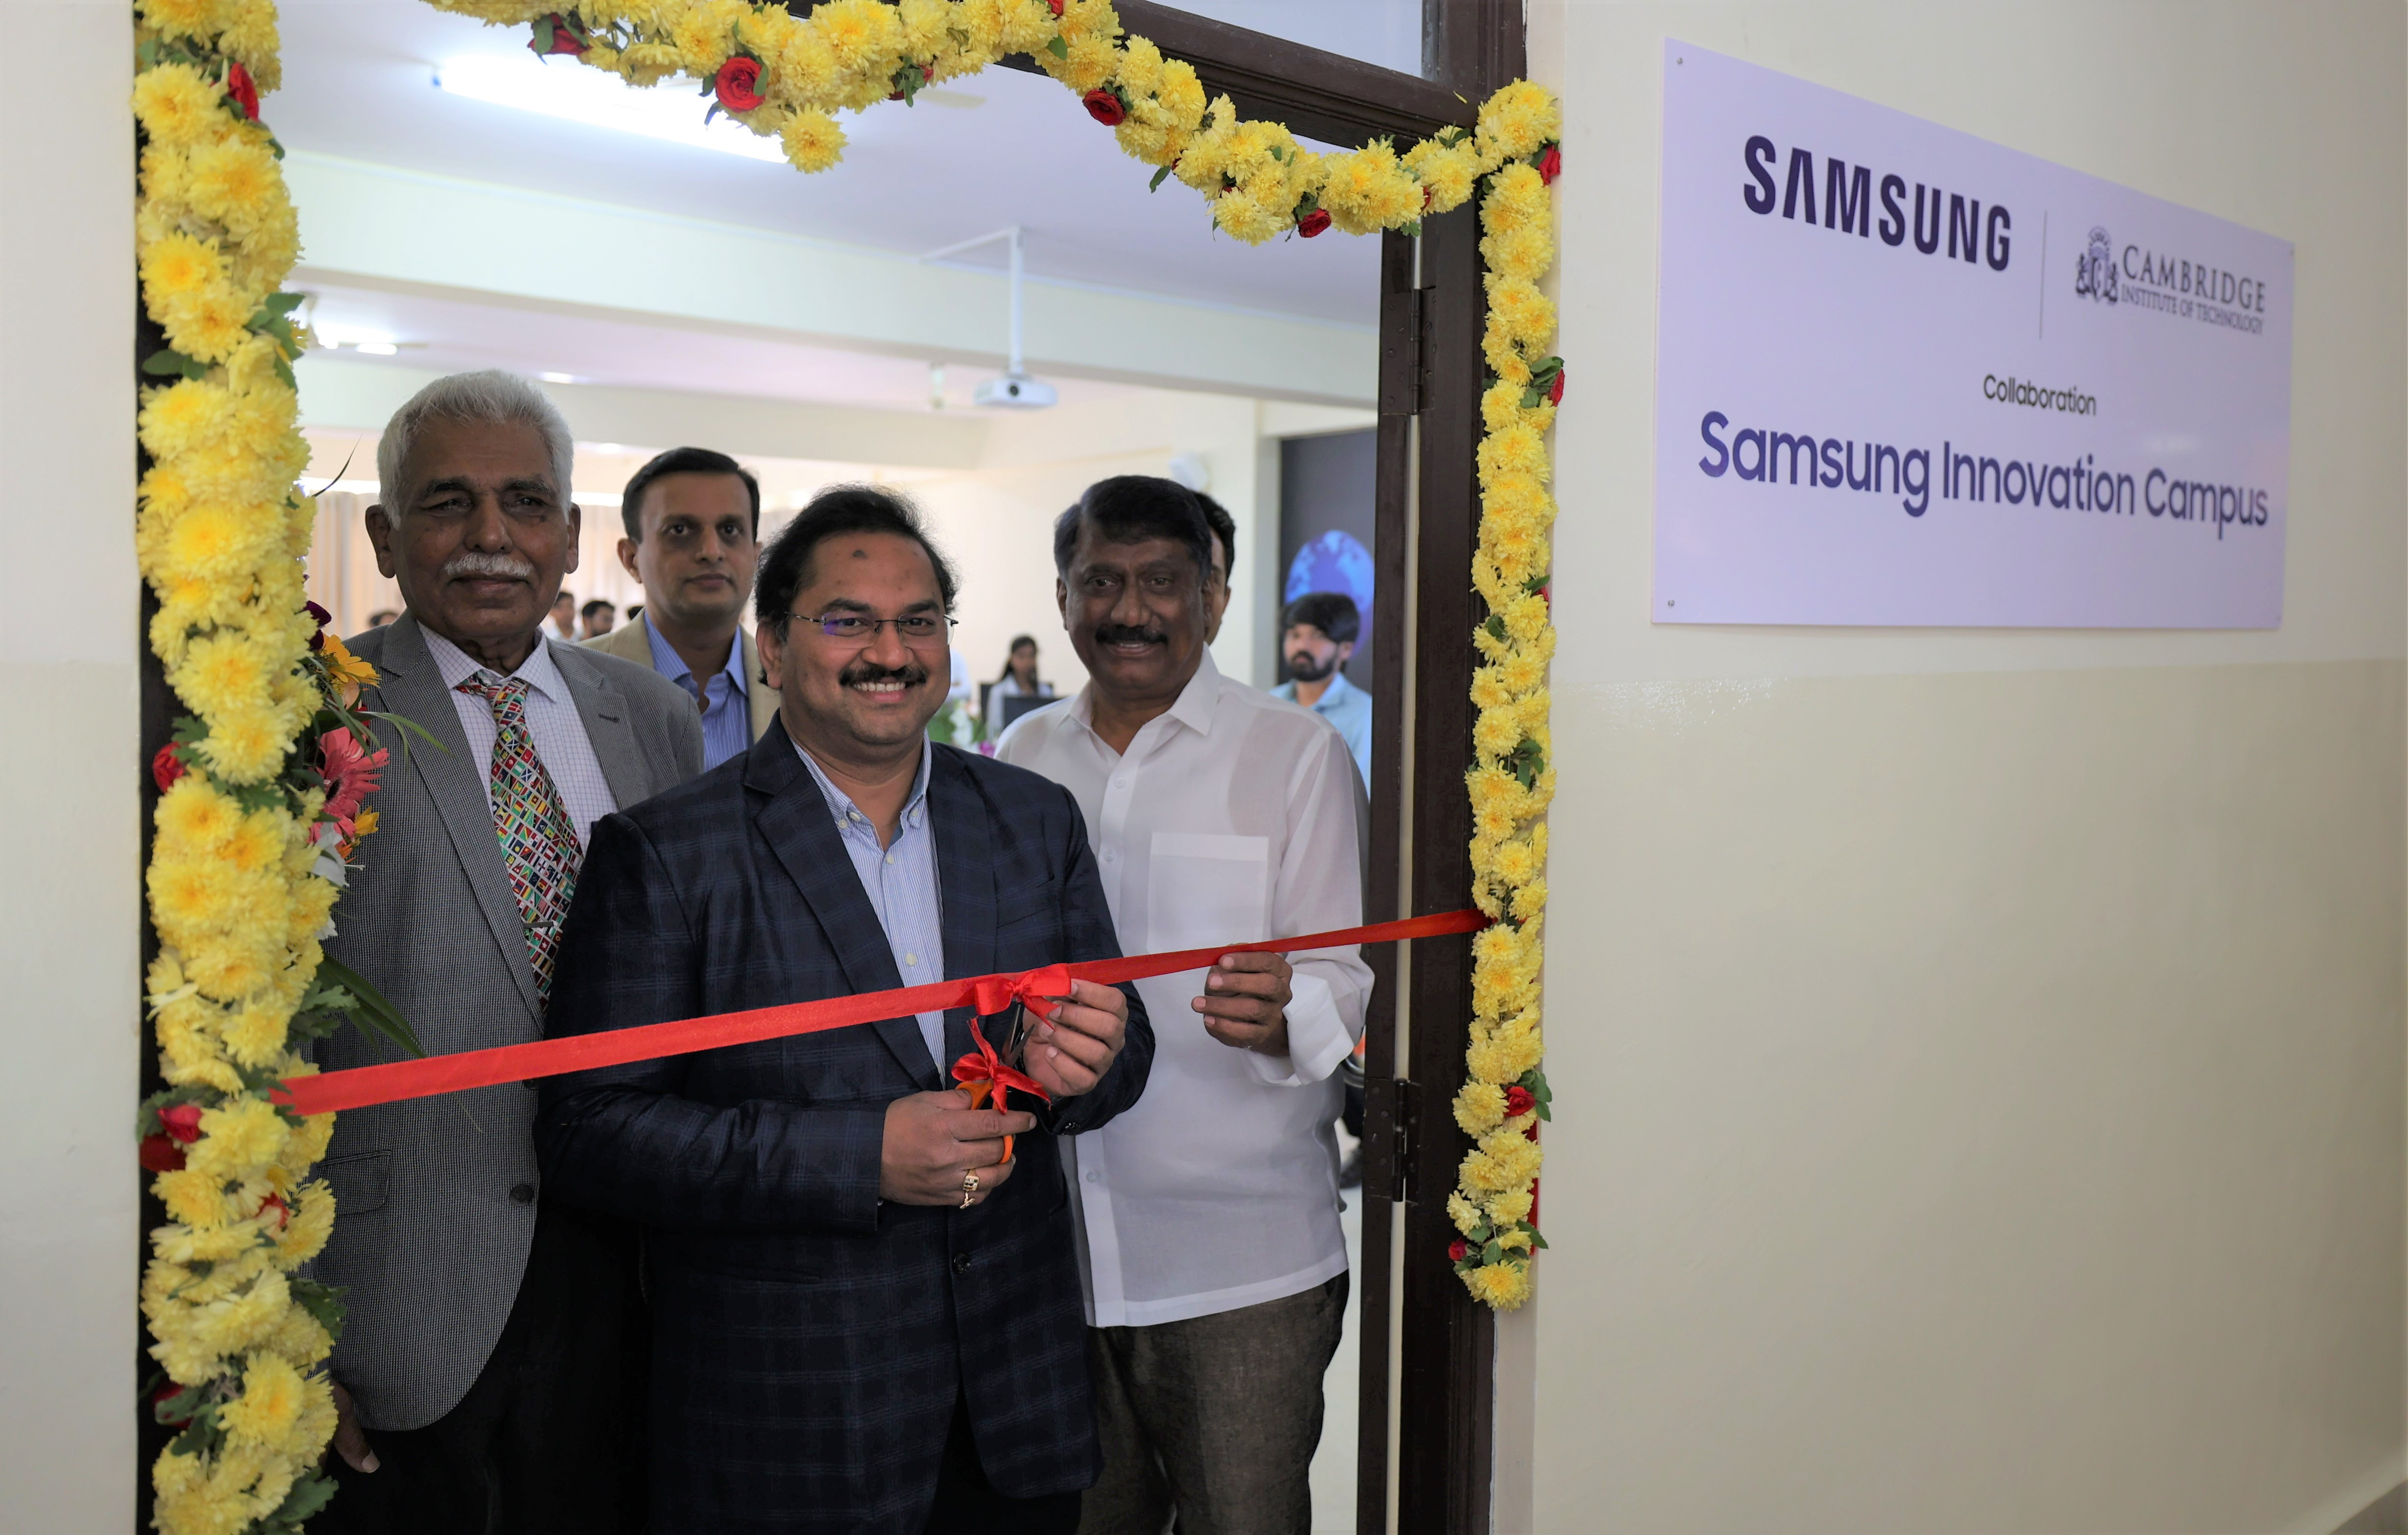 Samsung R&D Institute Bangalore Launches ‘Samsung Innovation Campus’ Program at Cambridge Institute of Technology, Bengaluru to Upskill Youth on AI, IoT, Big Data, Coding & Programming